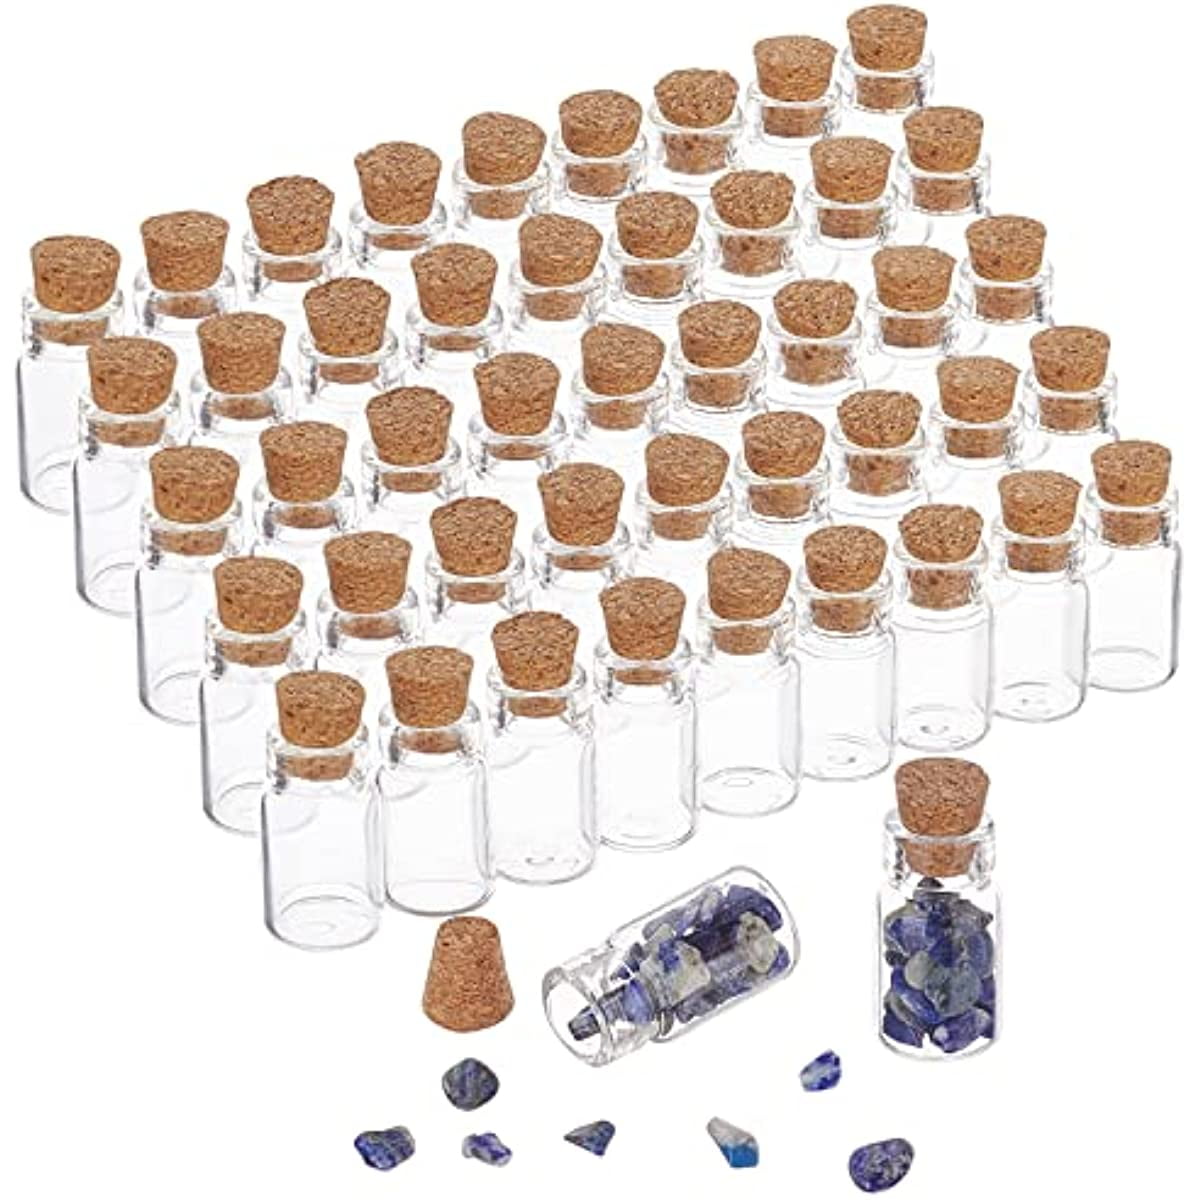 15 Pack Mini Glass Bottles with Cork Stoppers for Party Favors, Spices, 1.7 oz